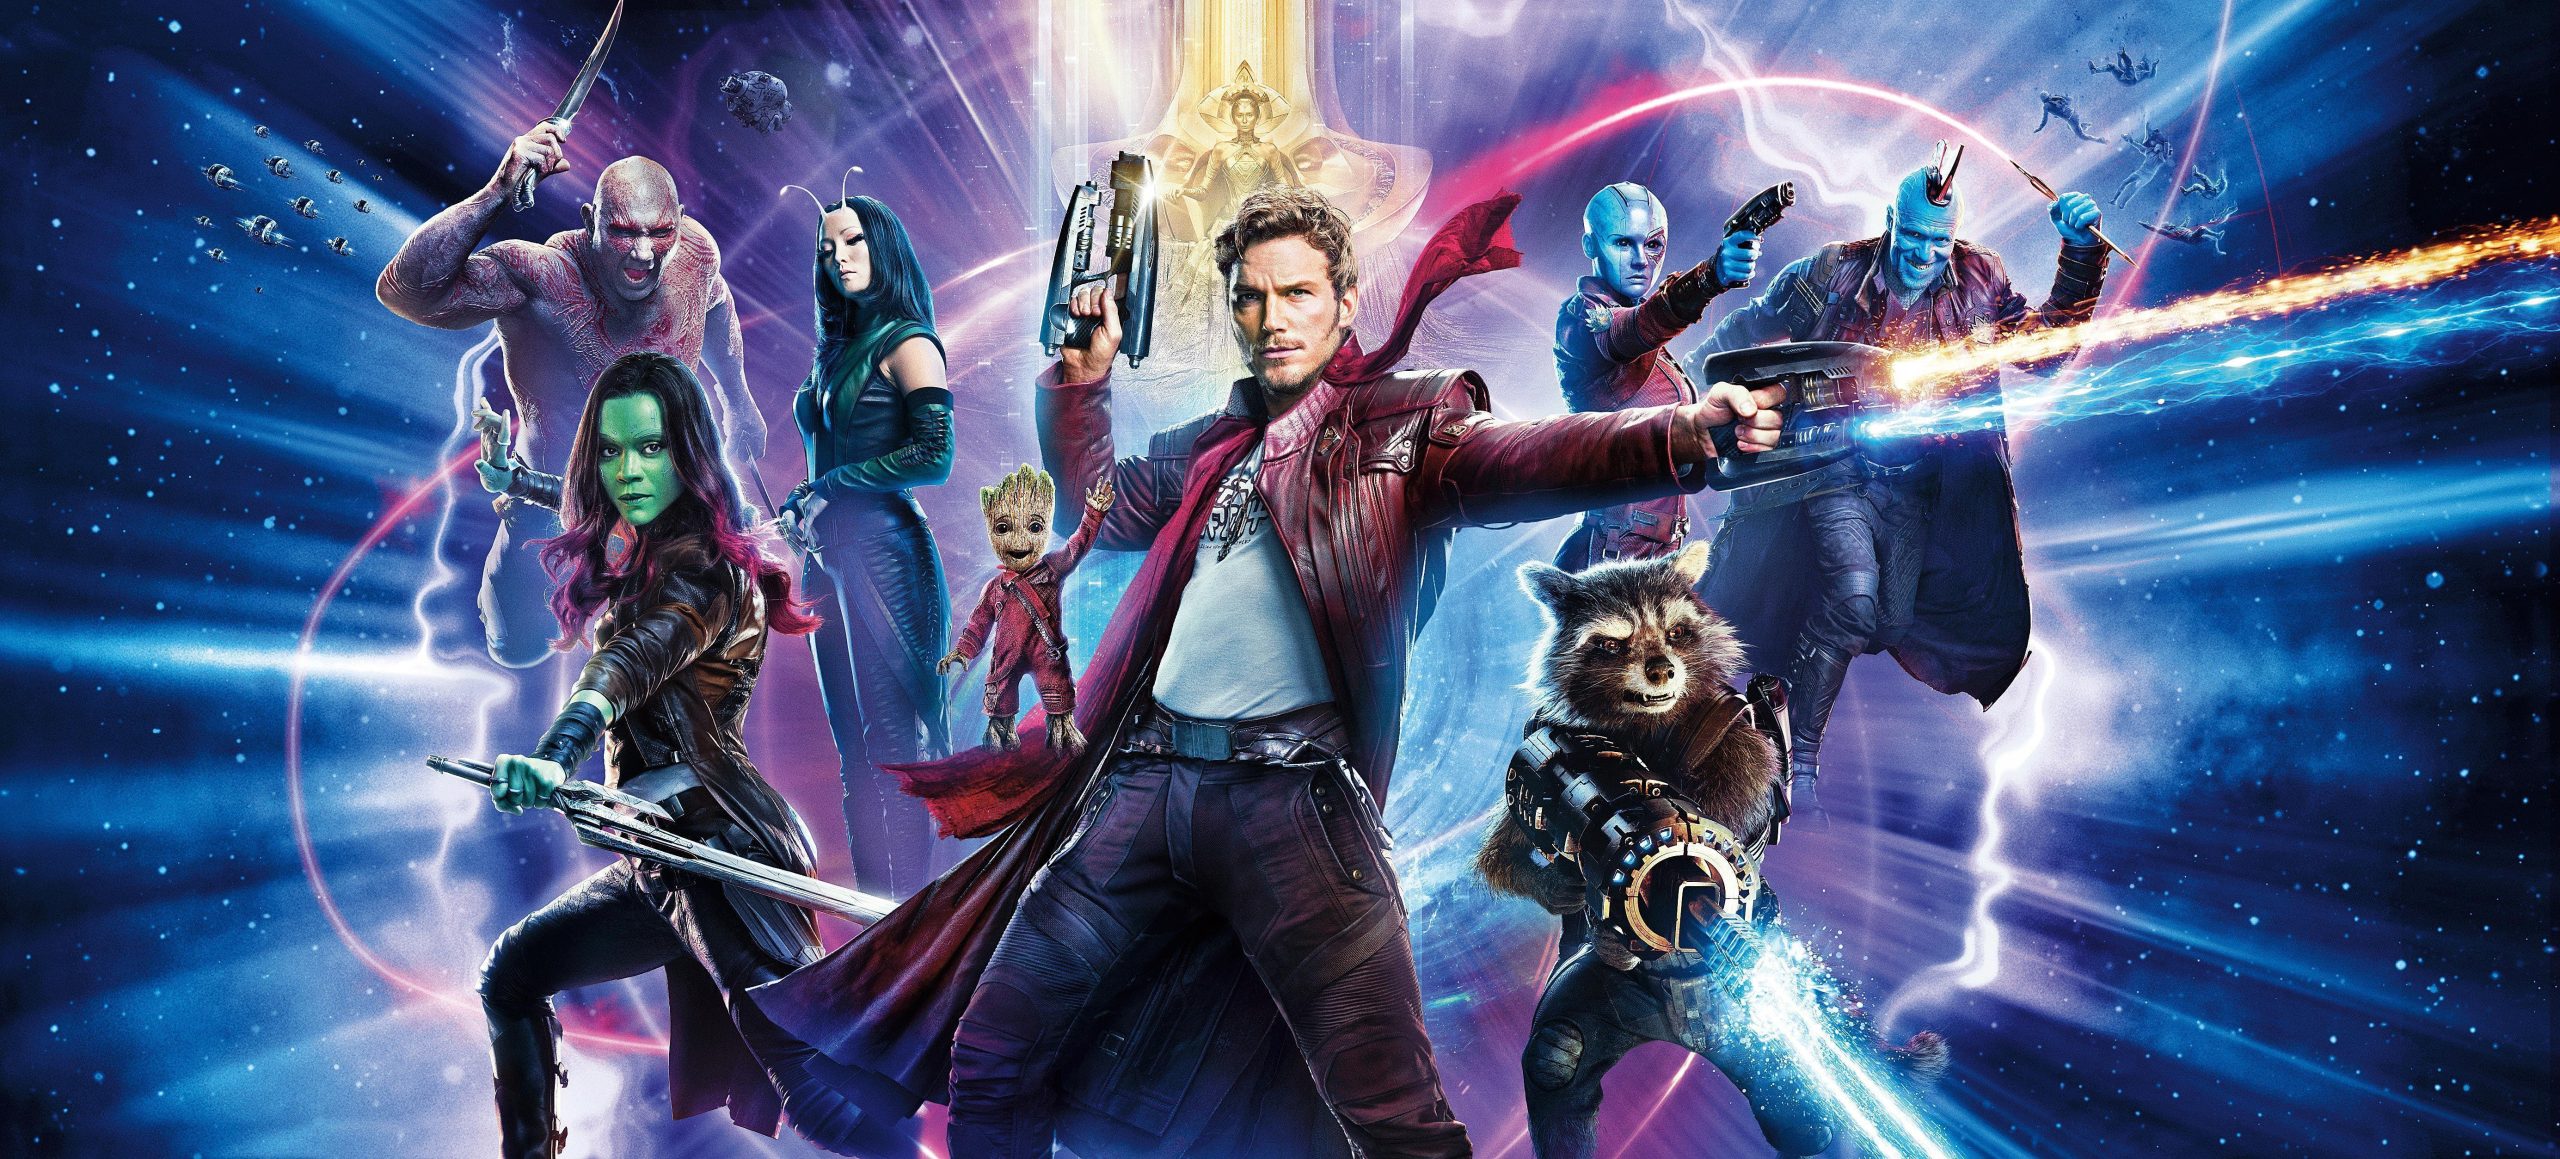 Guardians Of The Galaxy Vol 2 Free 4K Wallpapers, Guardians of the Galaxy Vol. 2, Movies